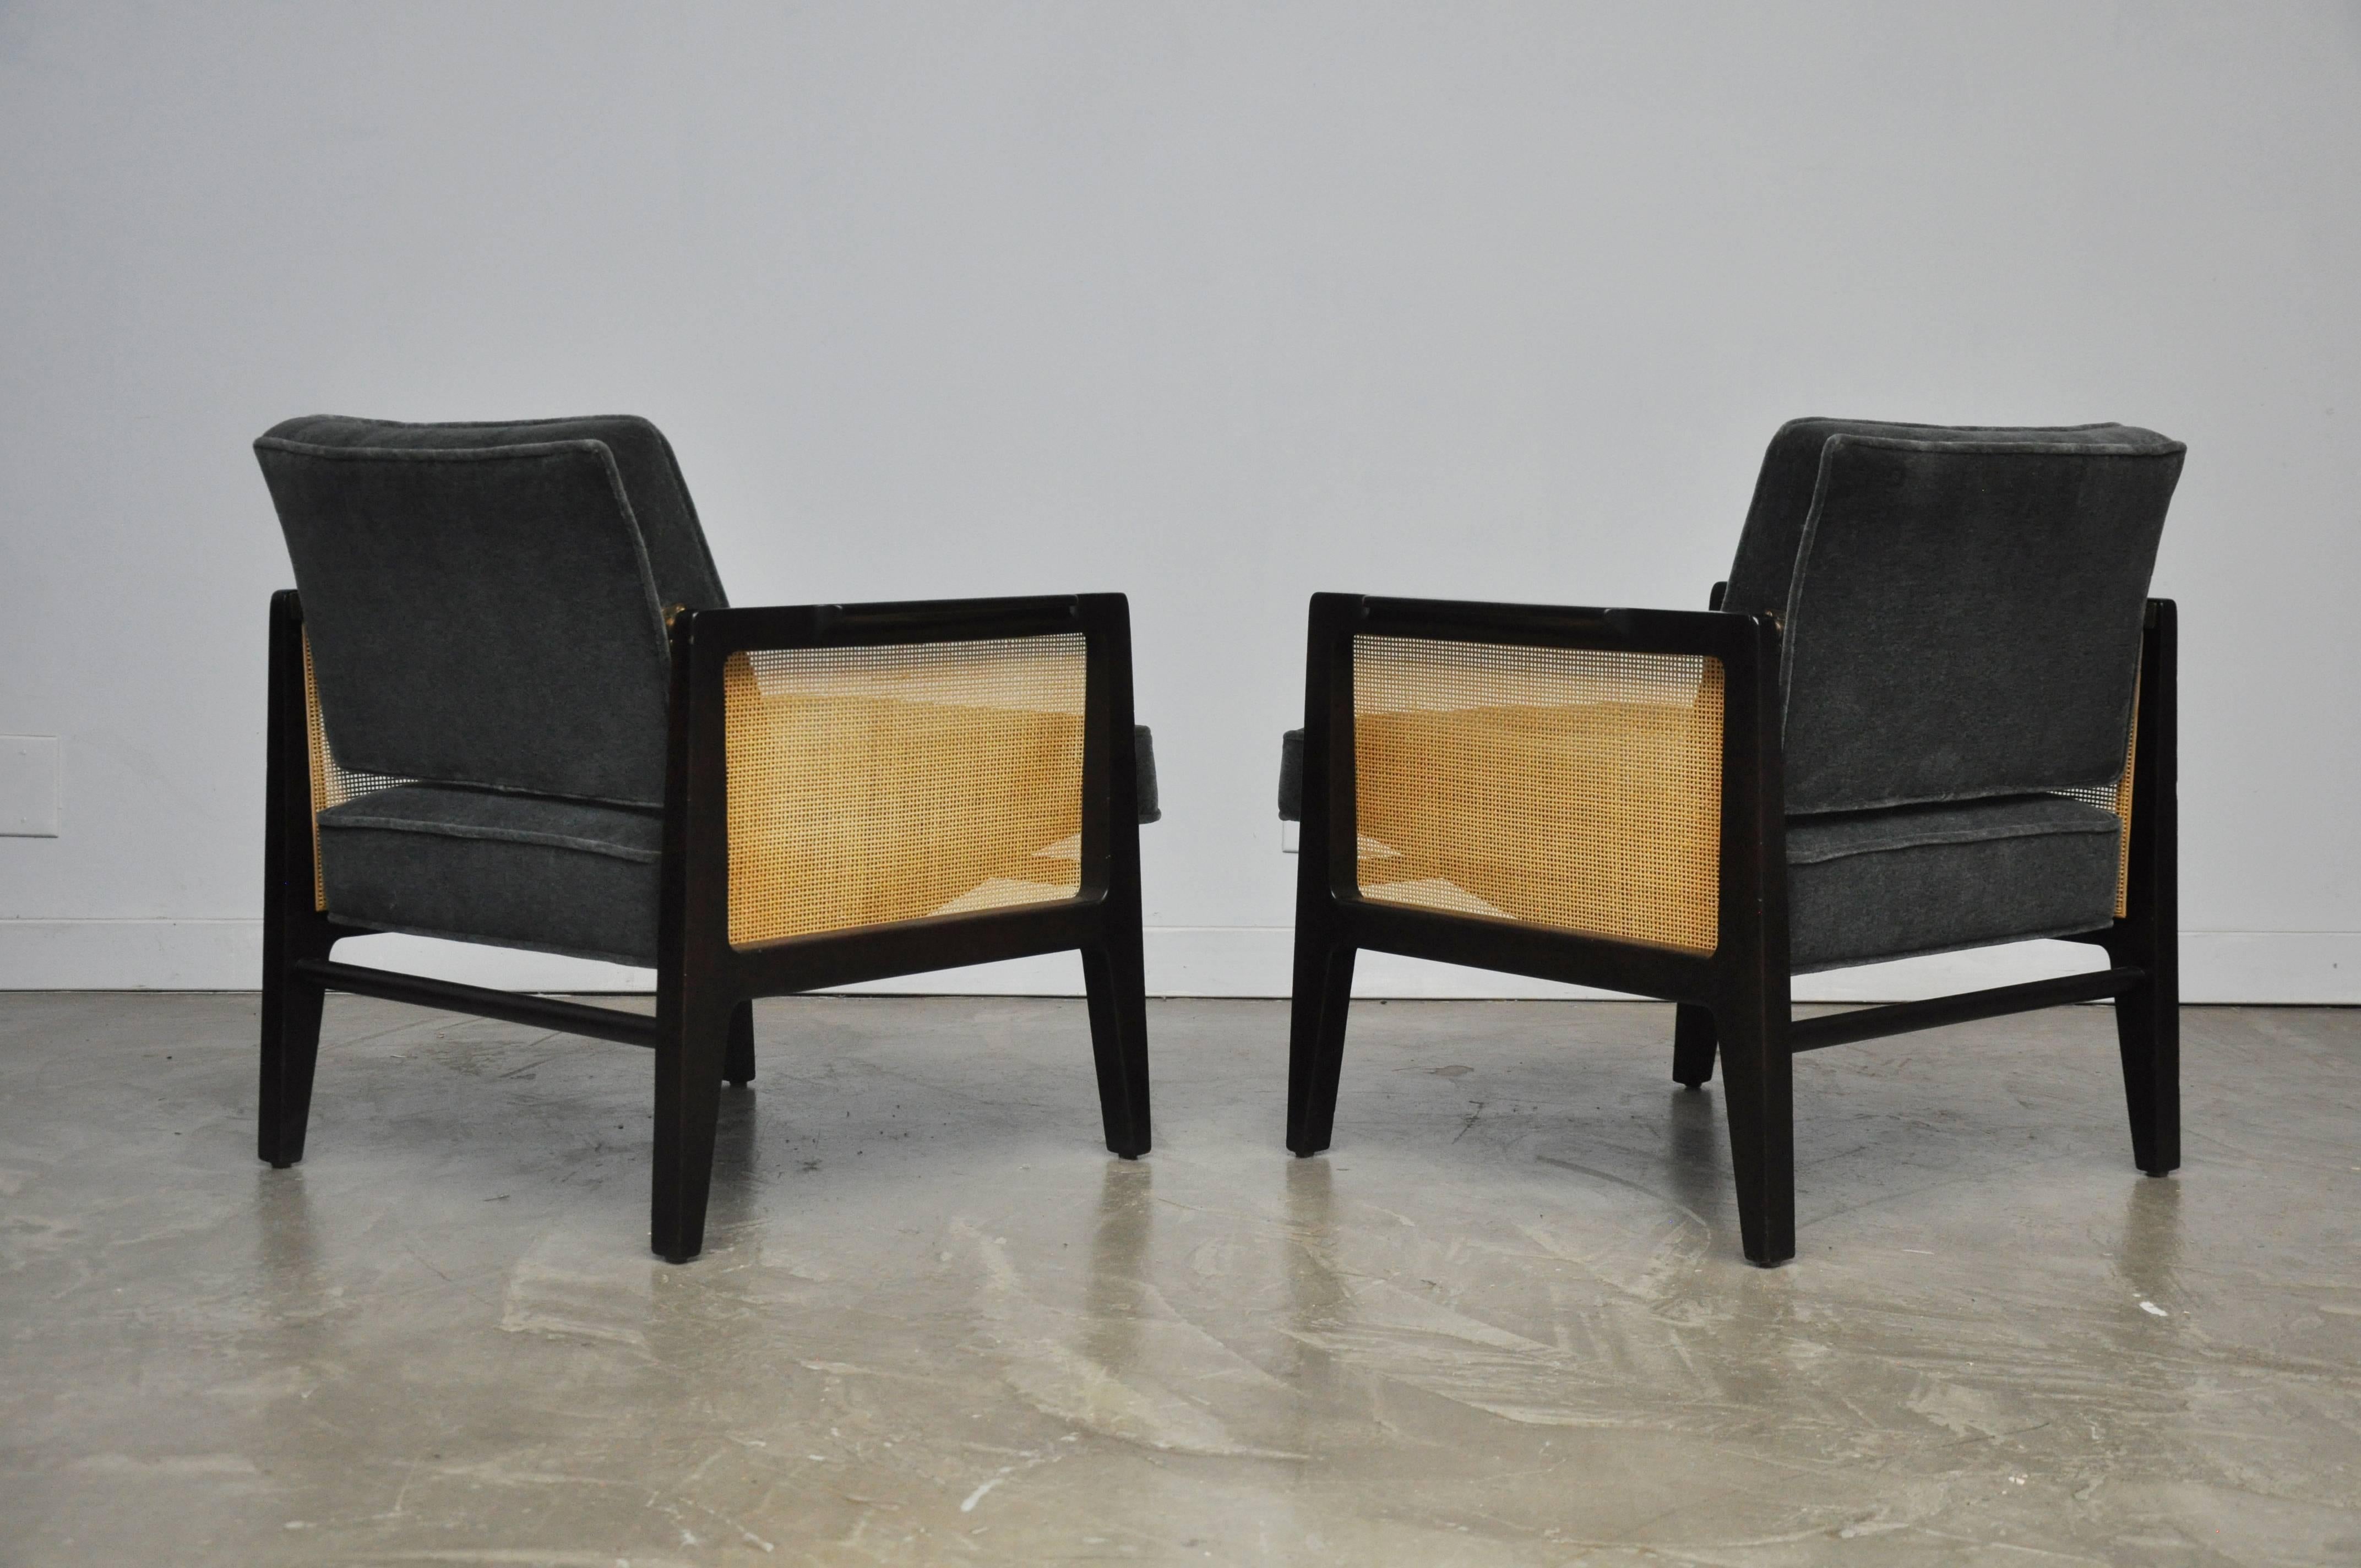 20th Century Edward Wormley Cane Side Lounge Chairs for Dunbar